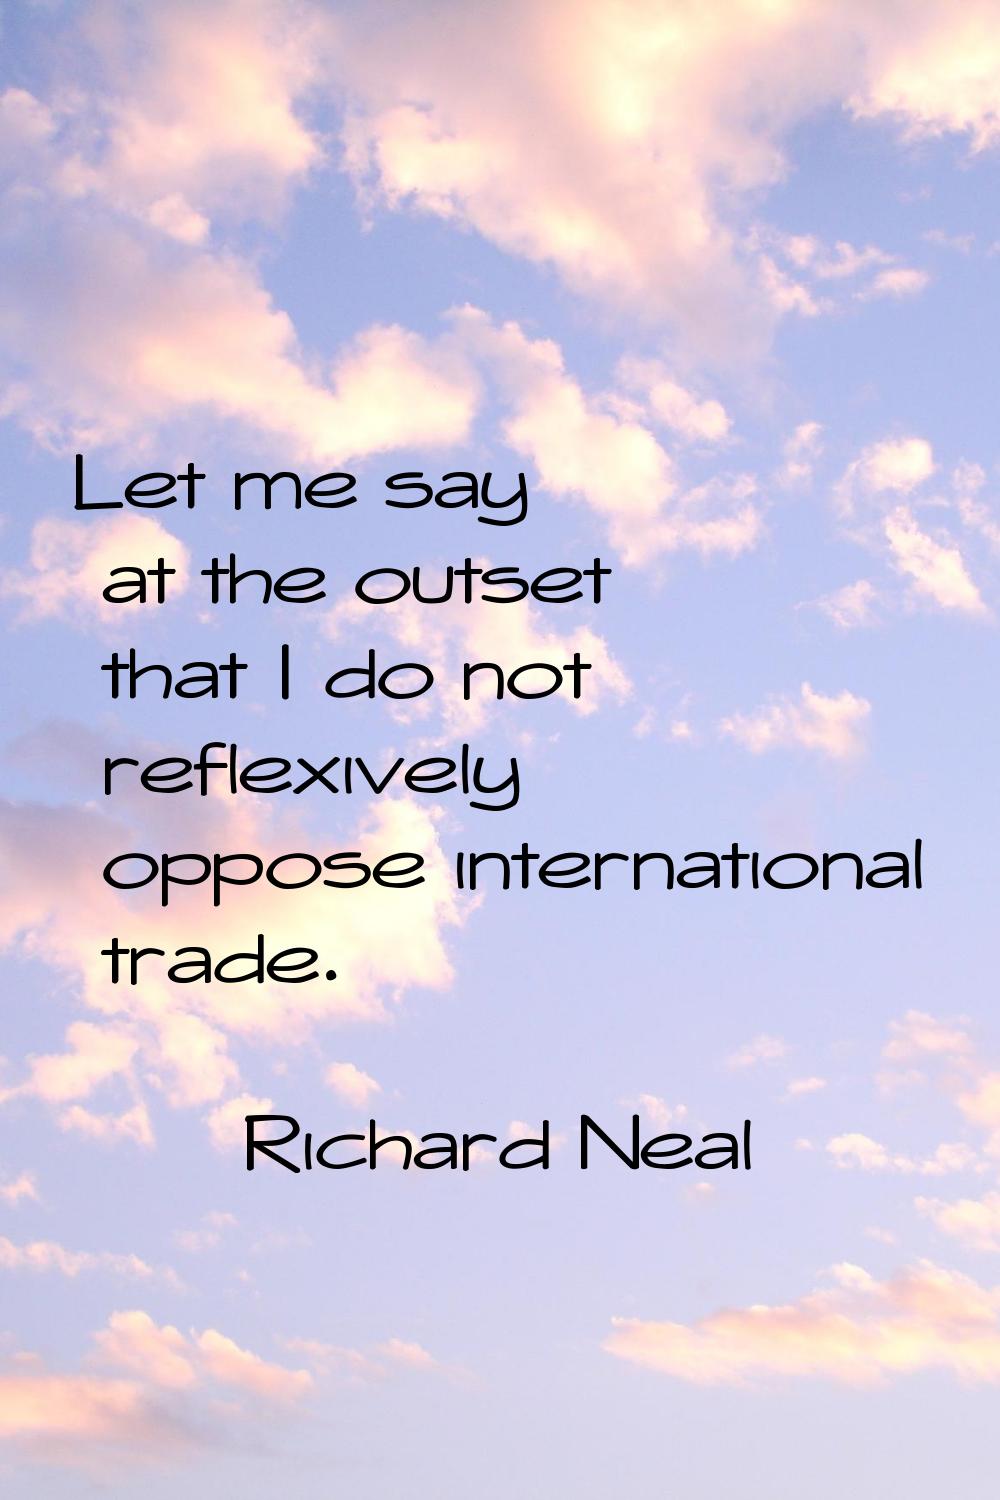 Let me say at the outset that I do not reflexively oppose international trade.